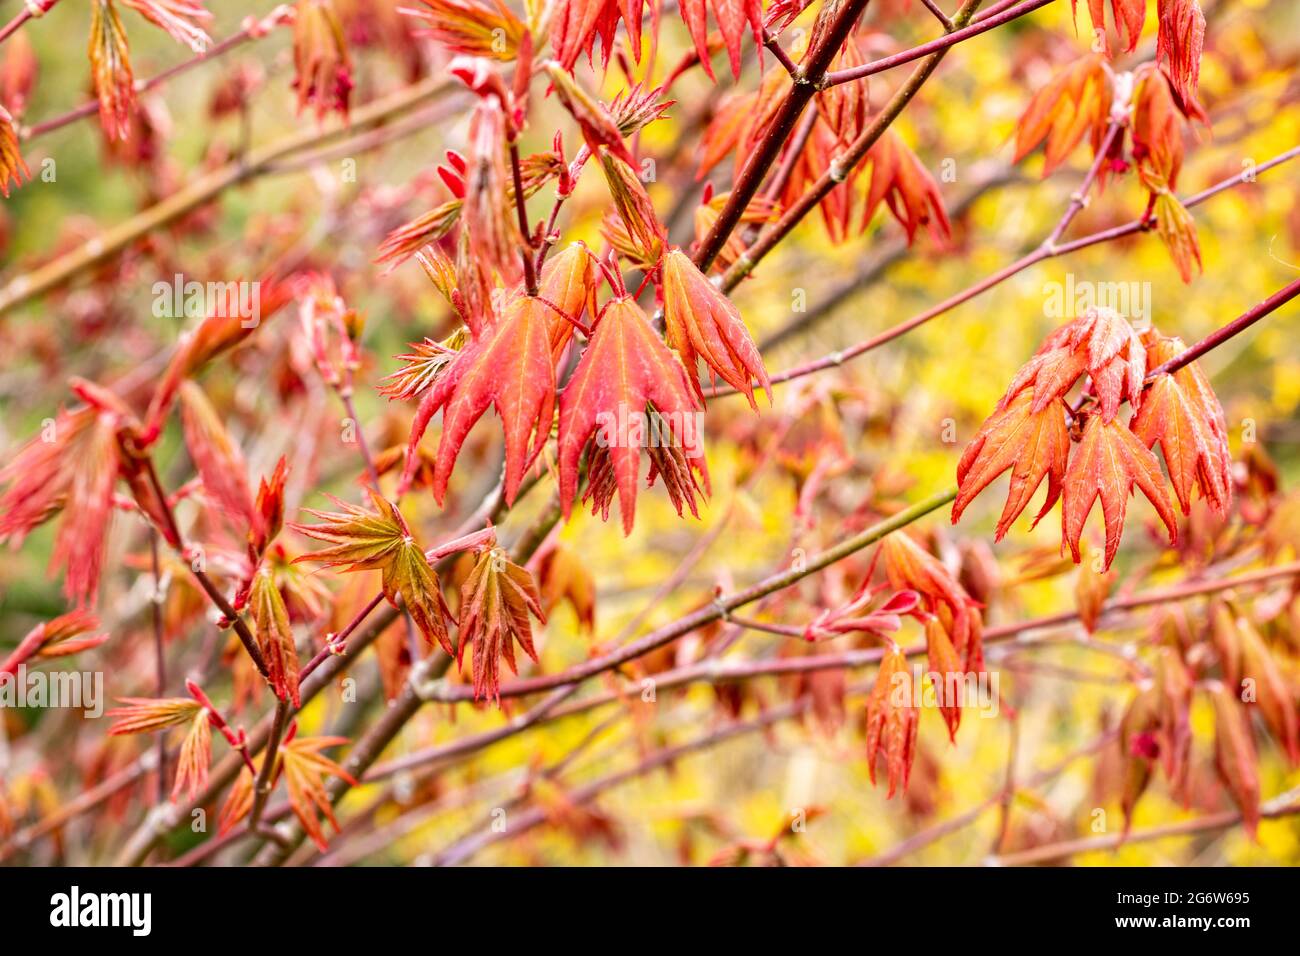 Acer Circinatum x Palmatum 'Red Wings'. A beautiful acer with orange-red leaves unfurling in Spring sunshine in the UK. Stock Photo